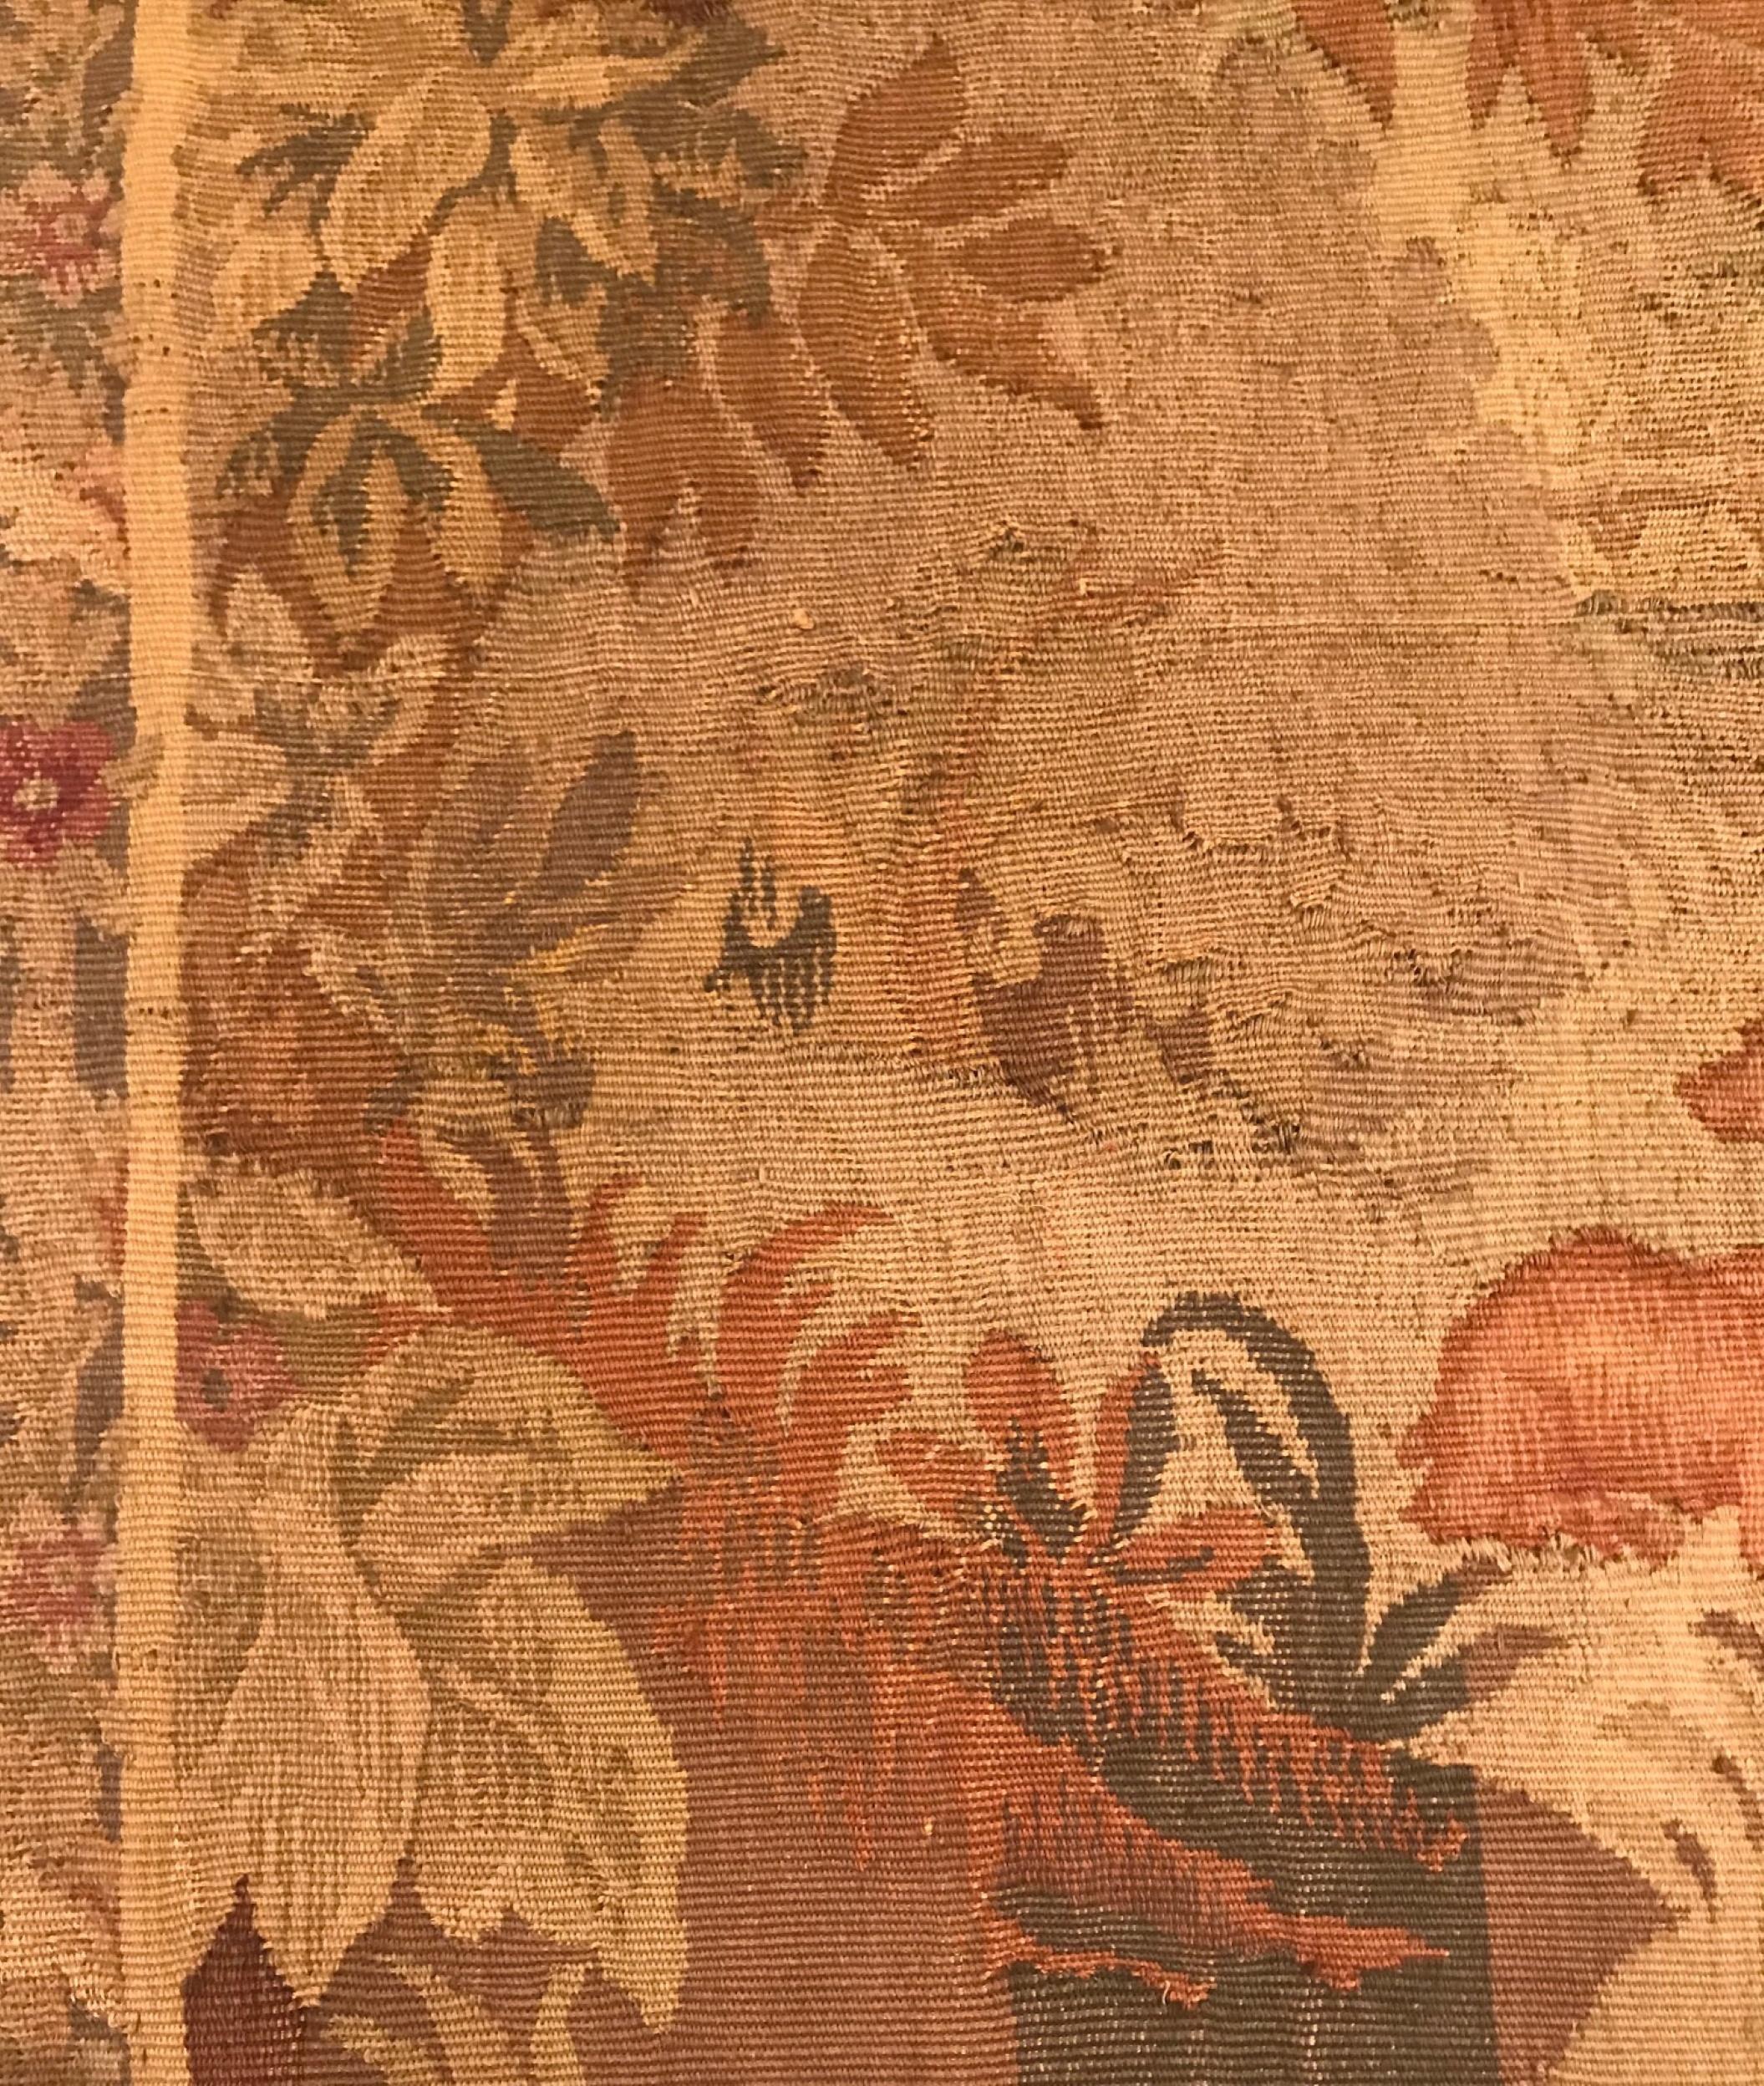 18th century Flemish verdure scenic landscape tapestry

Classic Flemish 18th century landscape tapestry. It features two birds in the trees
and an antelope in the foreground. In the center, a small cottage is surrounded by various exotic plants.